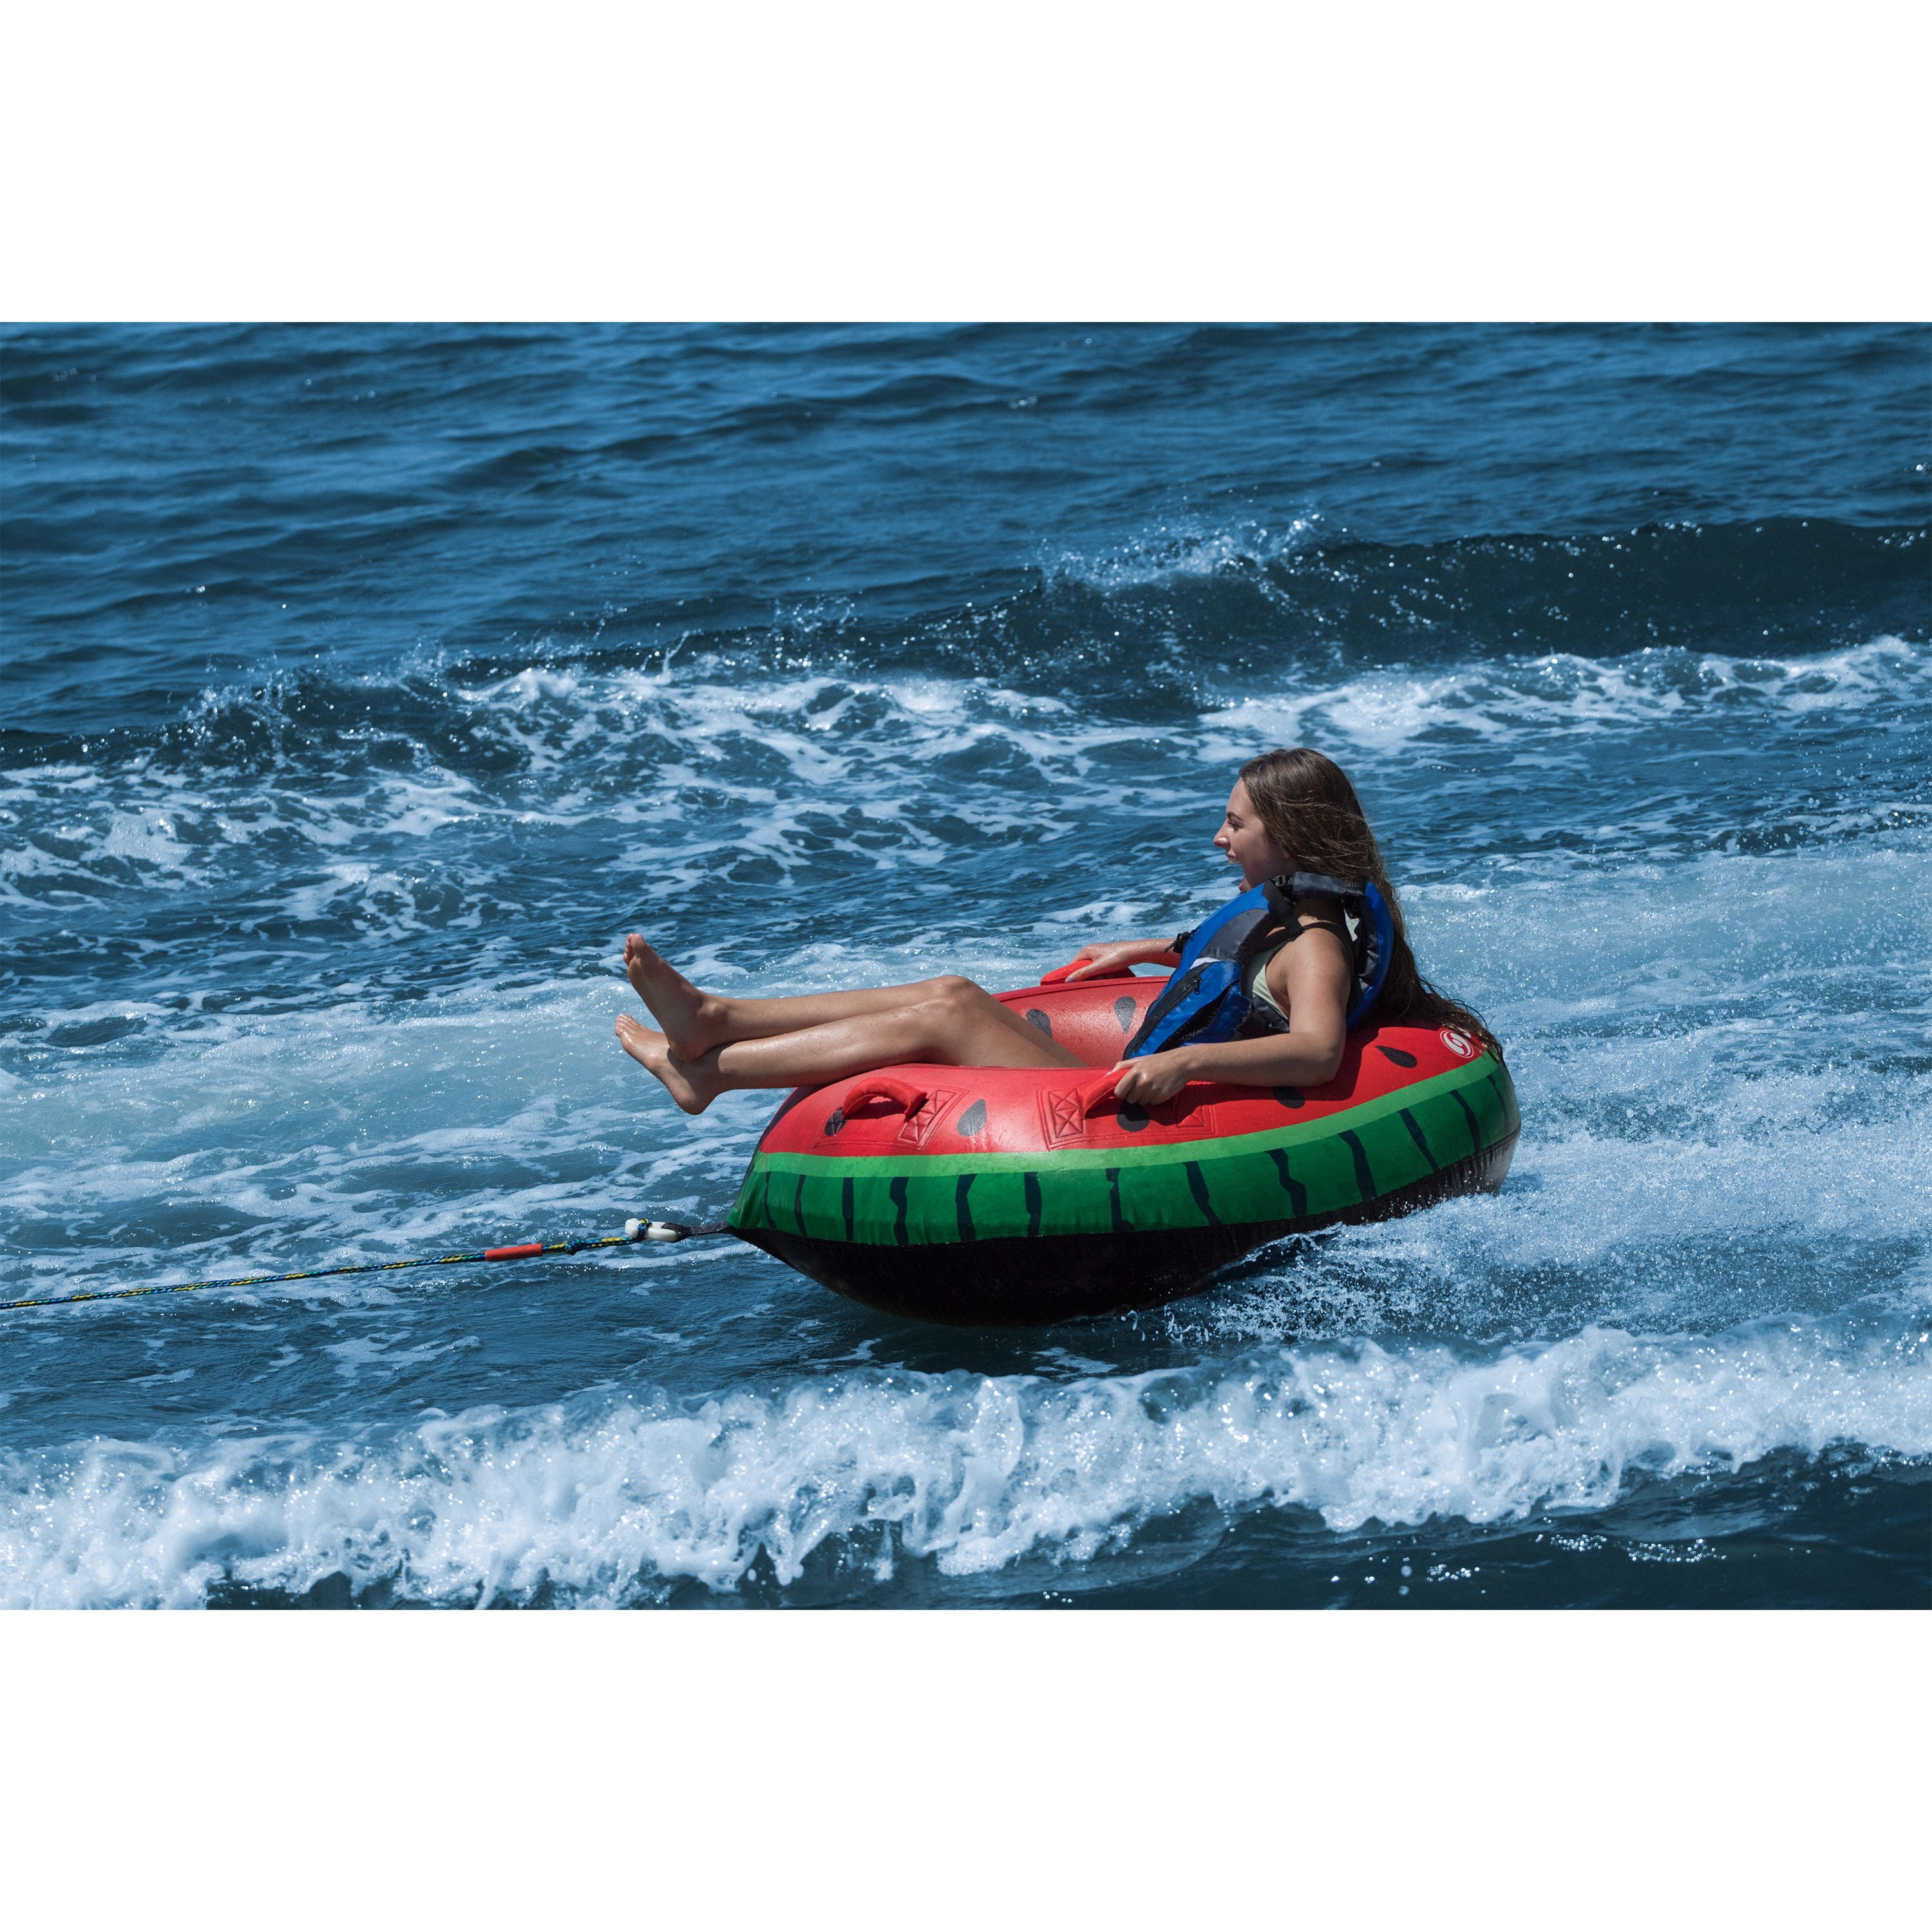 58" Towable Tube Boat Water Sports 2 Person Low Profile Inflatable Deck Tow Raft 